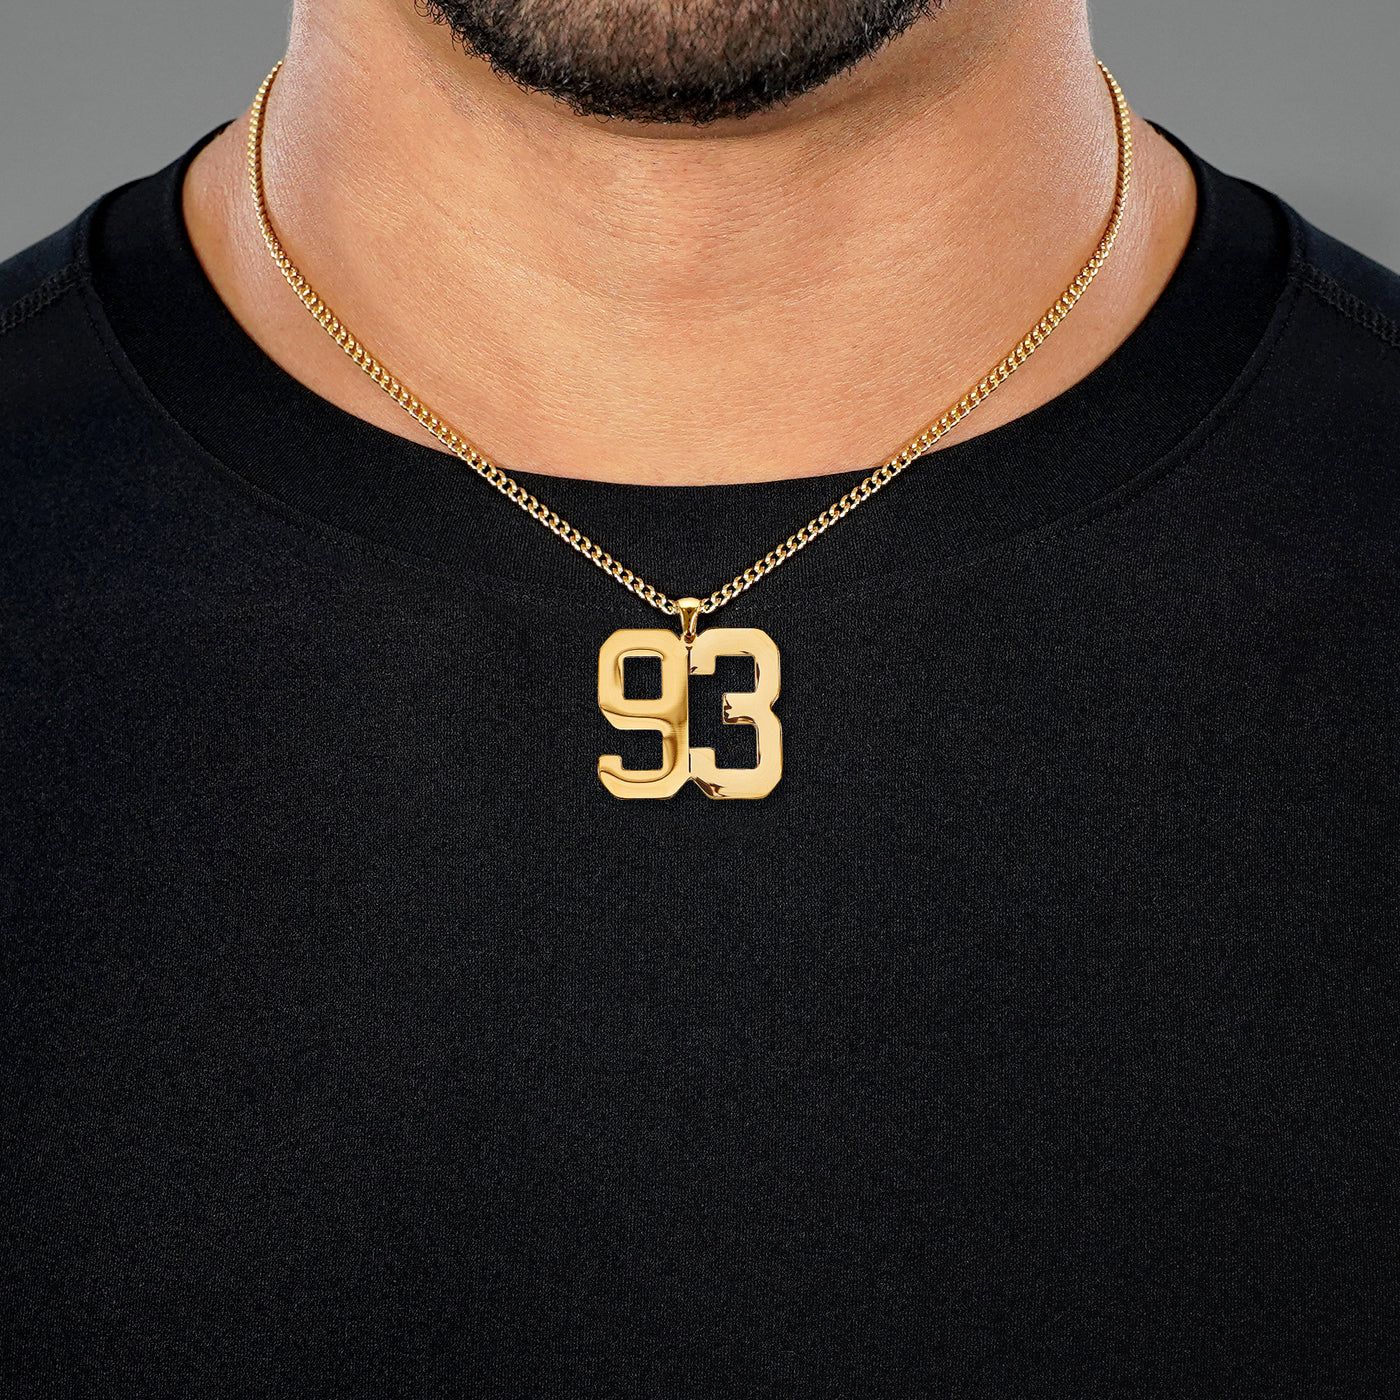 93 Number Pendant with Chain Necklace - Gold Plated Stainless Steel